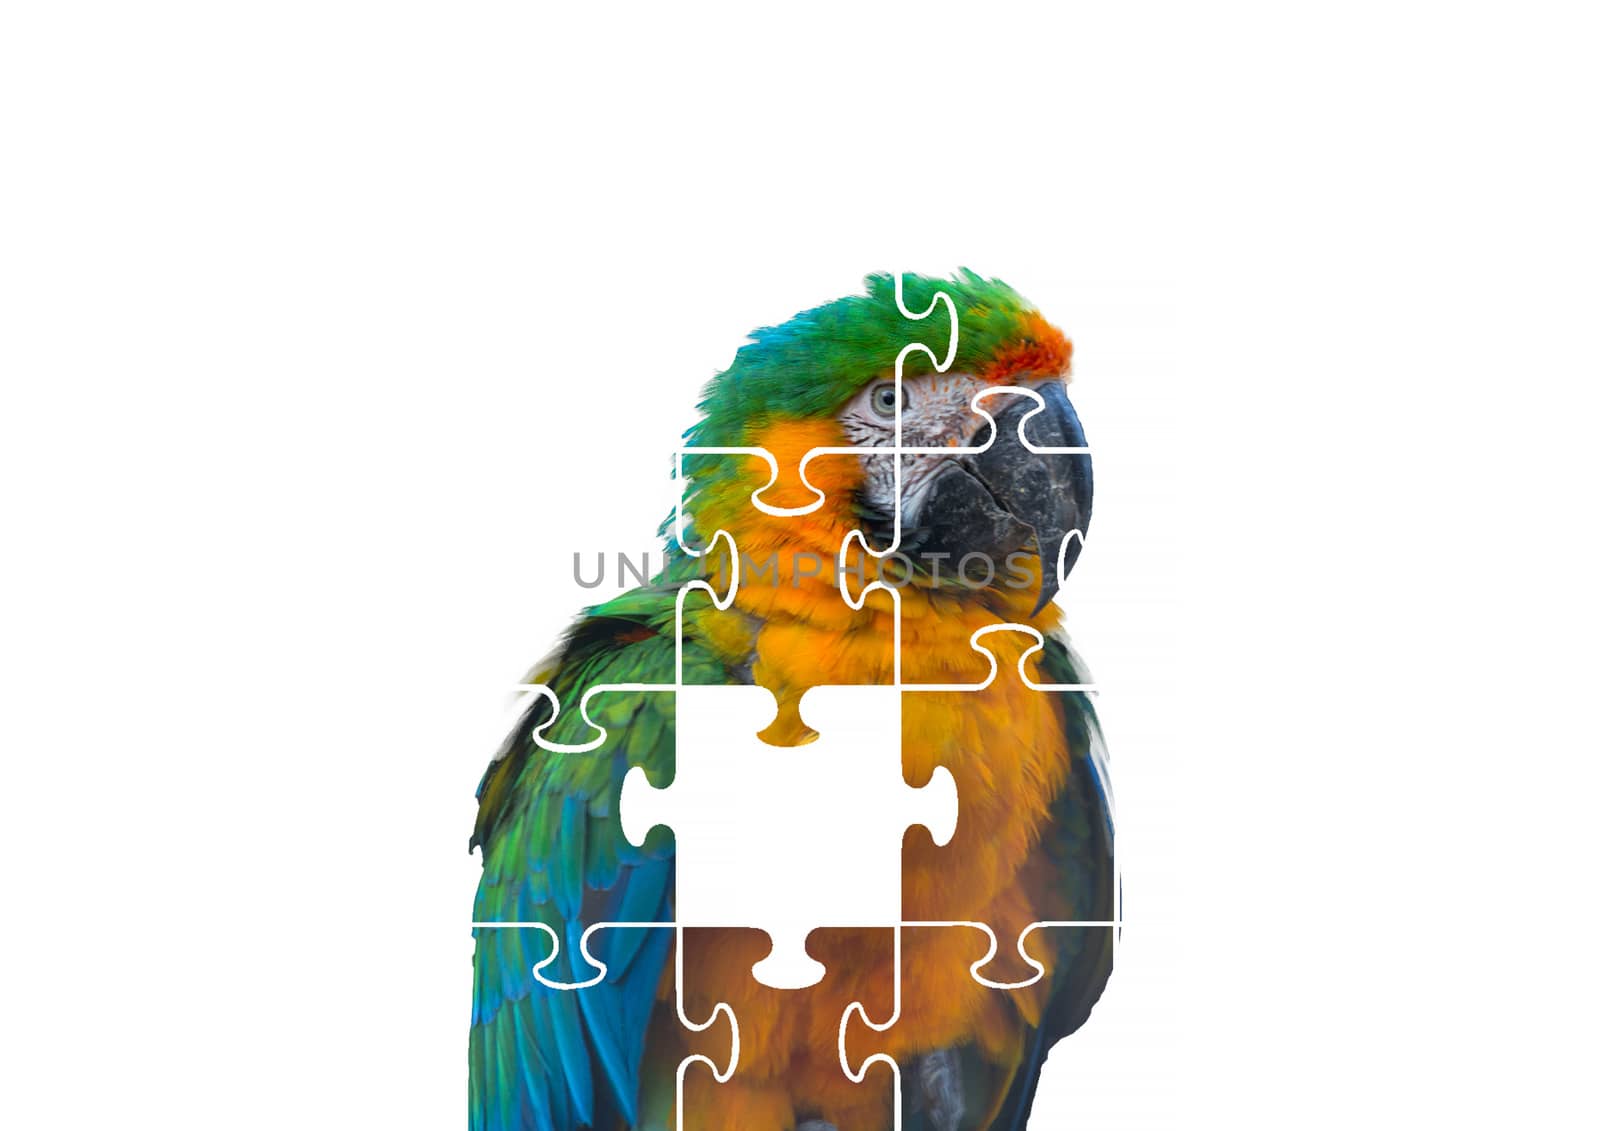 Parrot puzzle on white background.